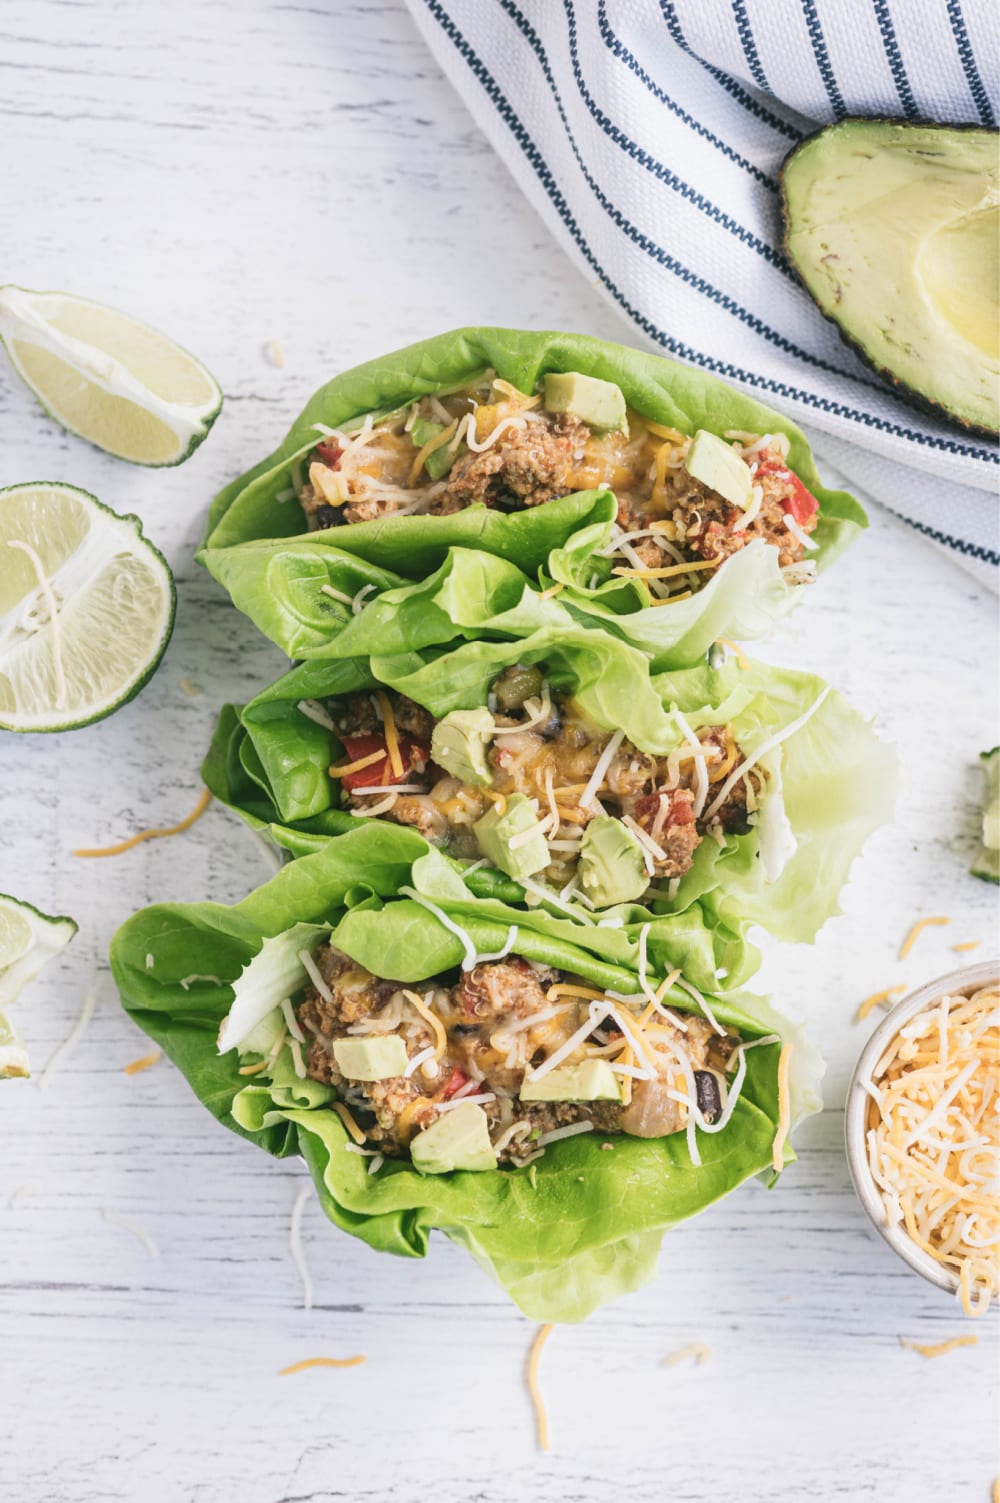 Overhead photo with lettuce wraps filled with Mexican crock pot taco casserole on a white surface. Surrounding the wraps are a white and blue striped towel, half an avocado, sliced limes, and a ramekin full of shredded cheese.